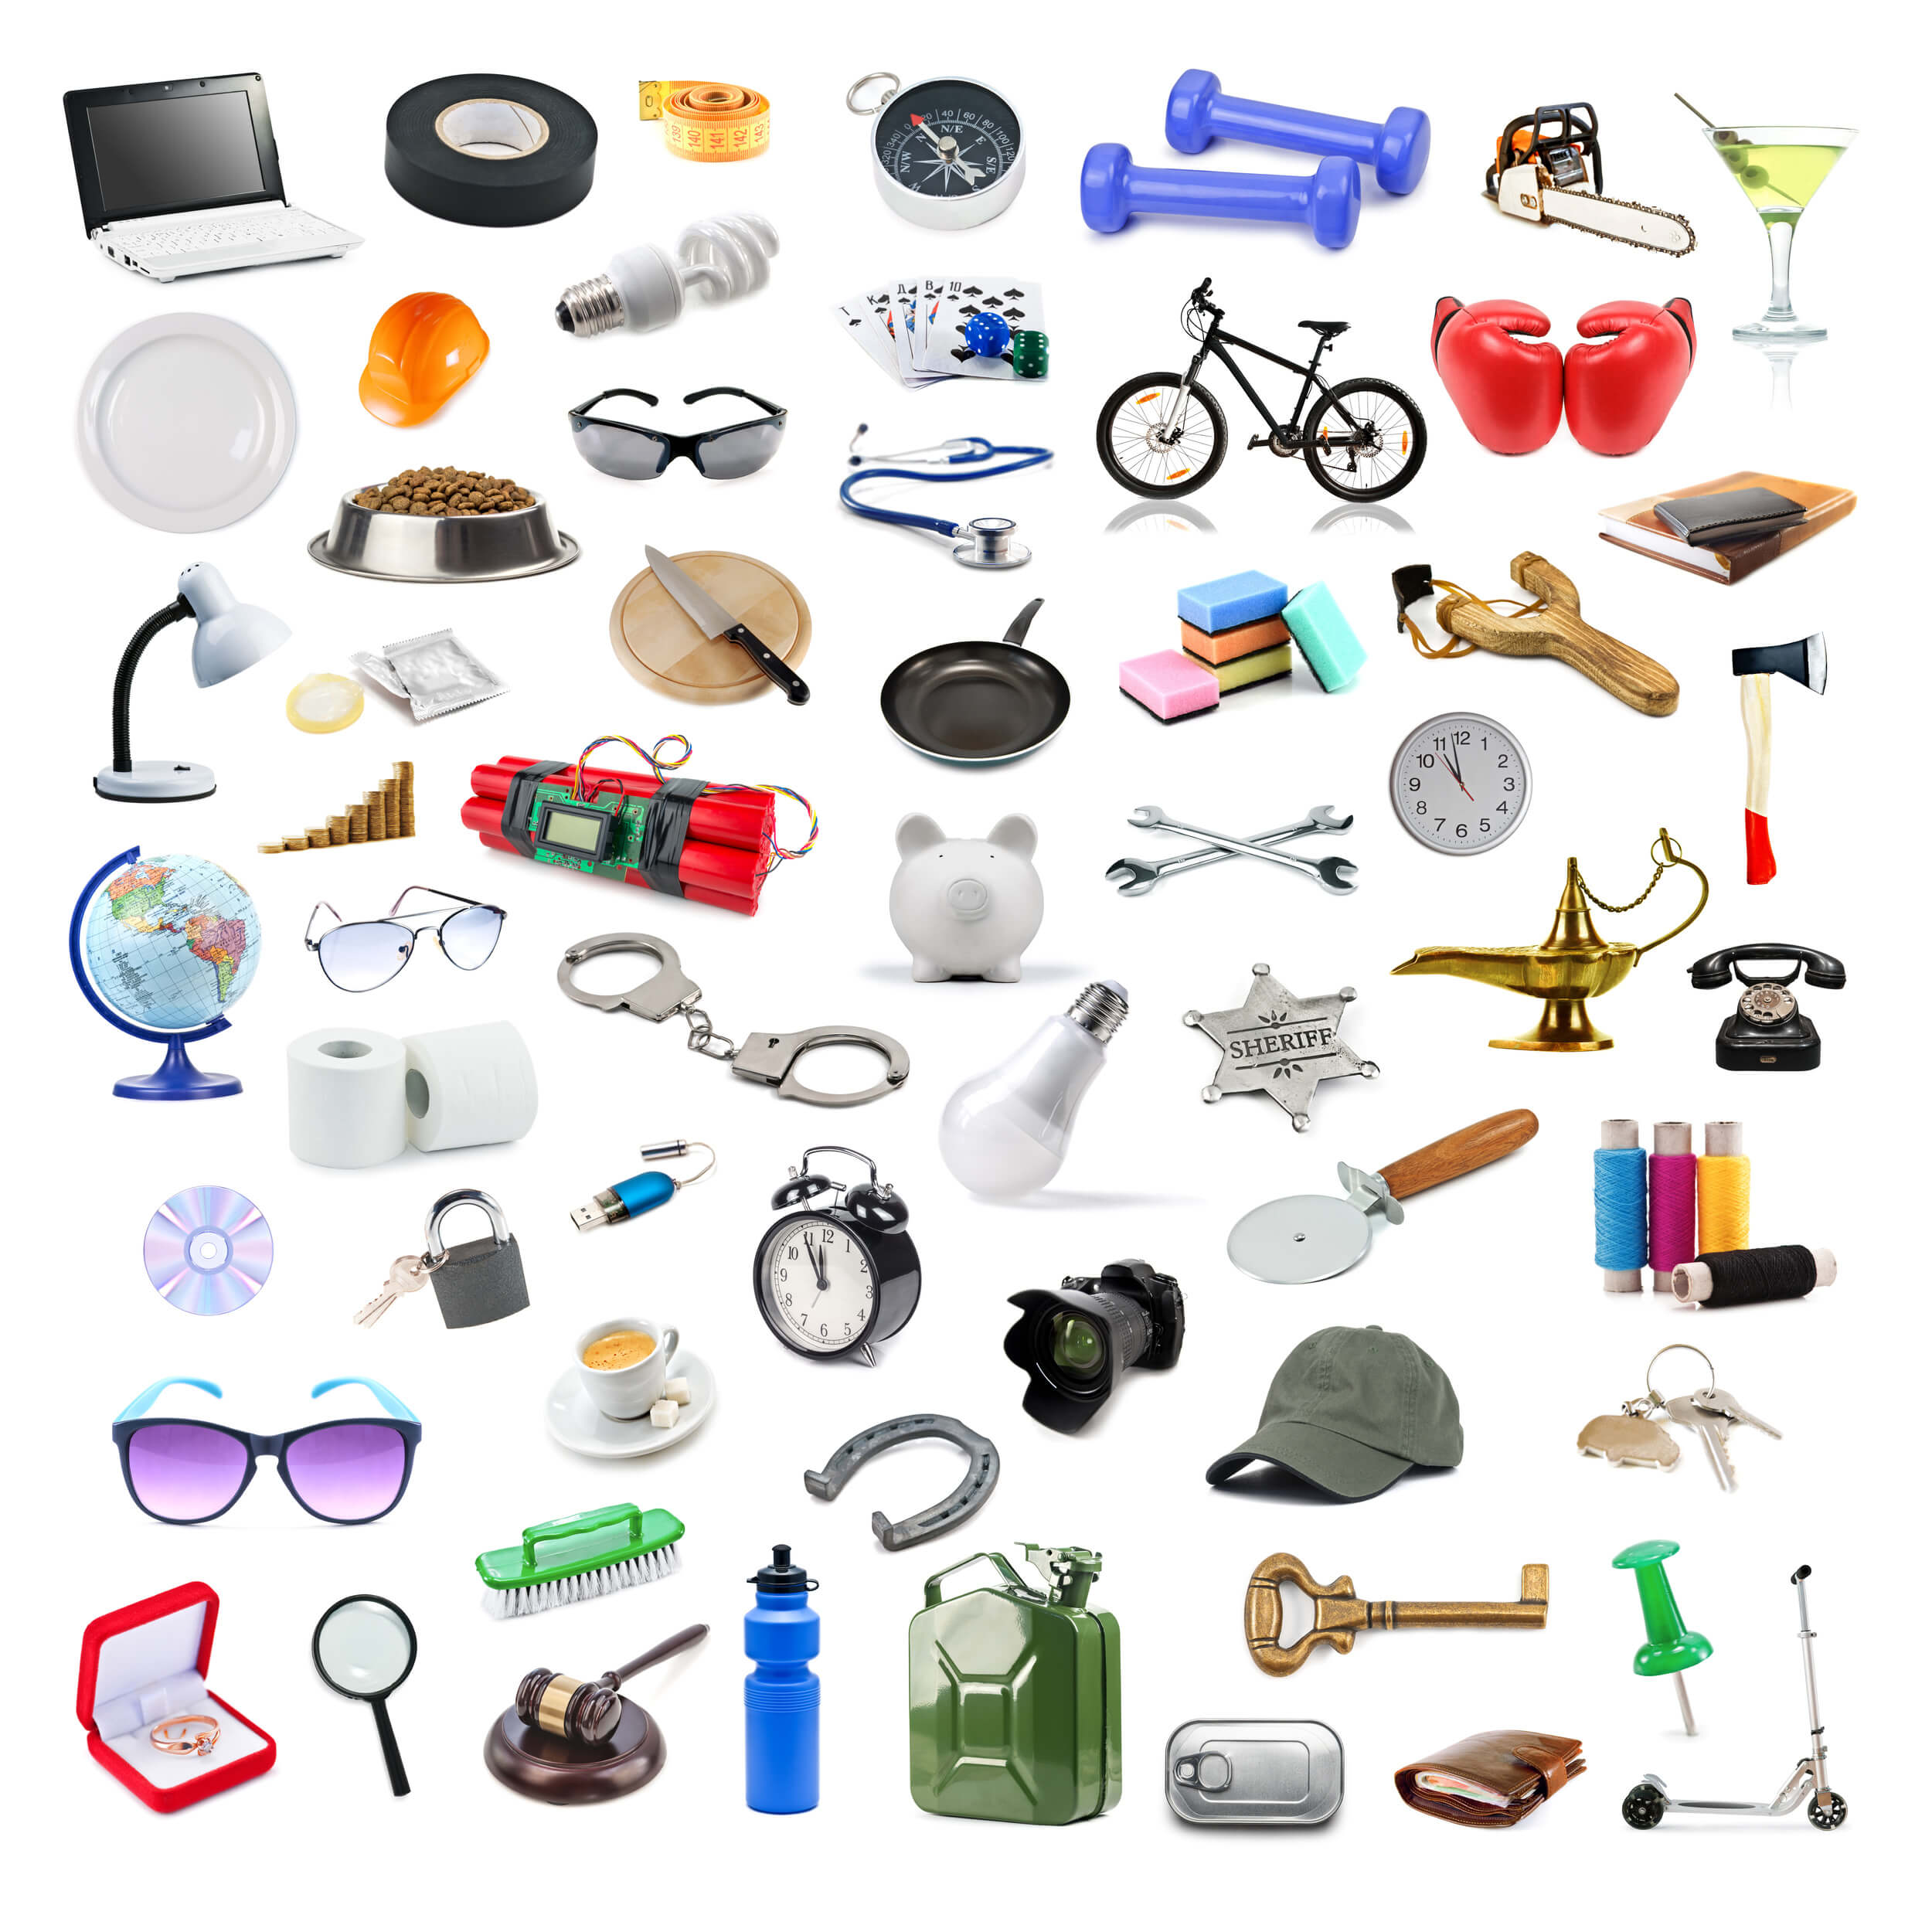 The background picture shows variety of objects such as glasses, clock, badge, and so on.